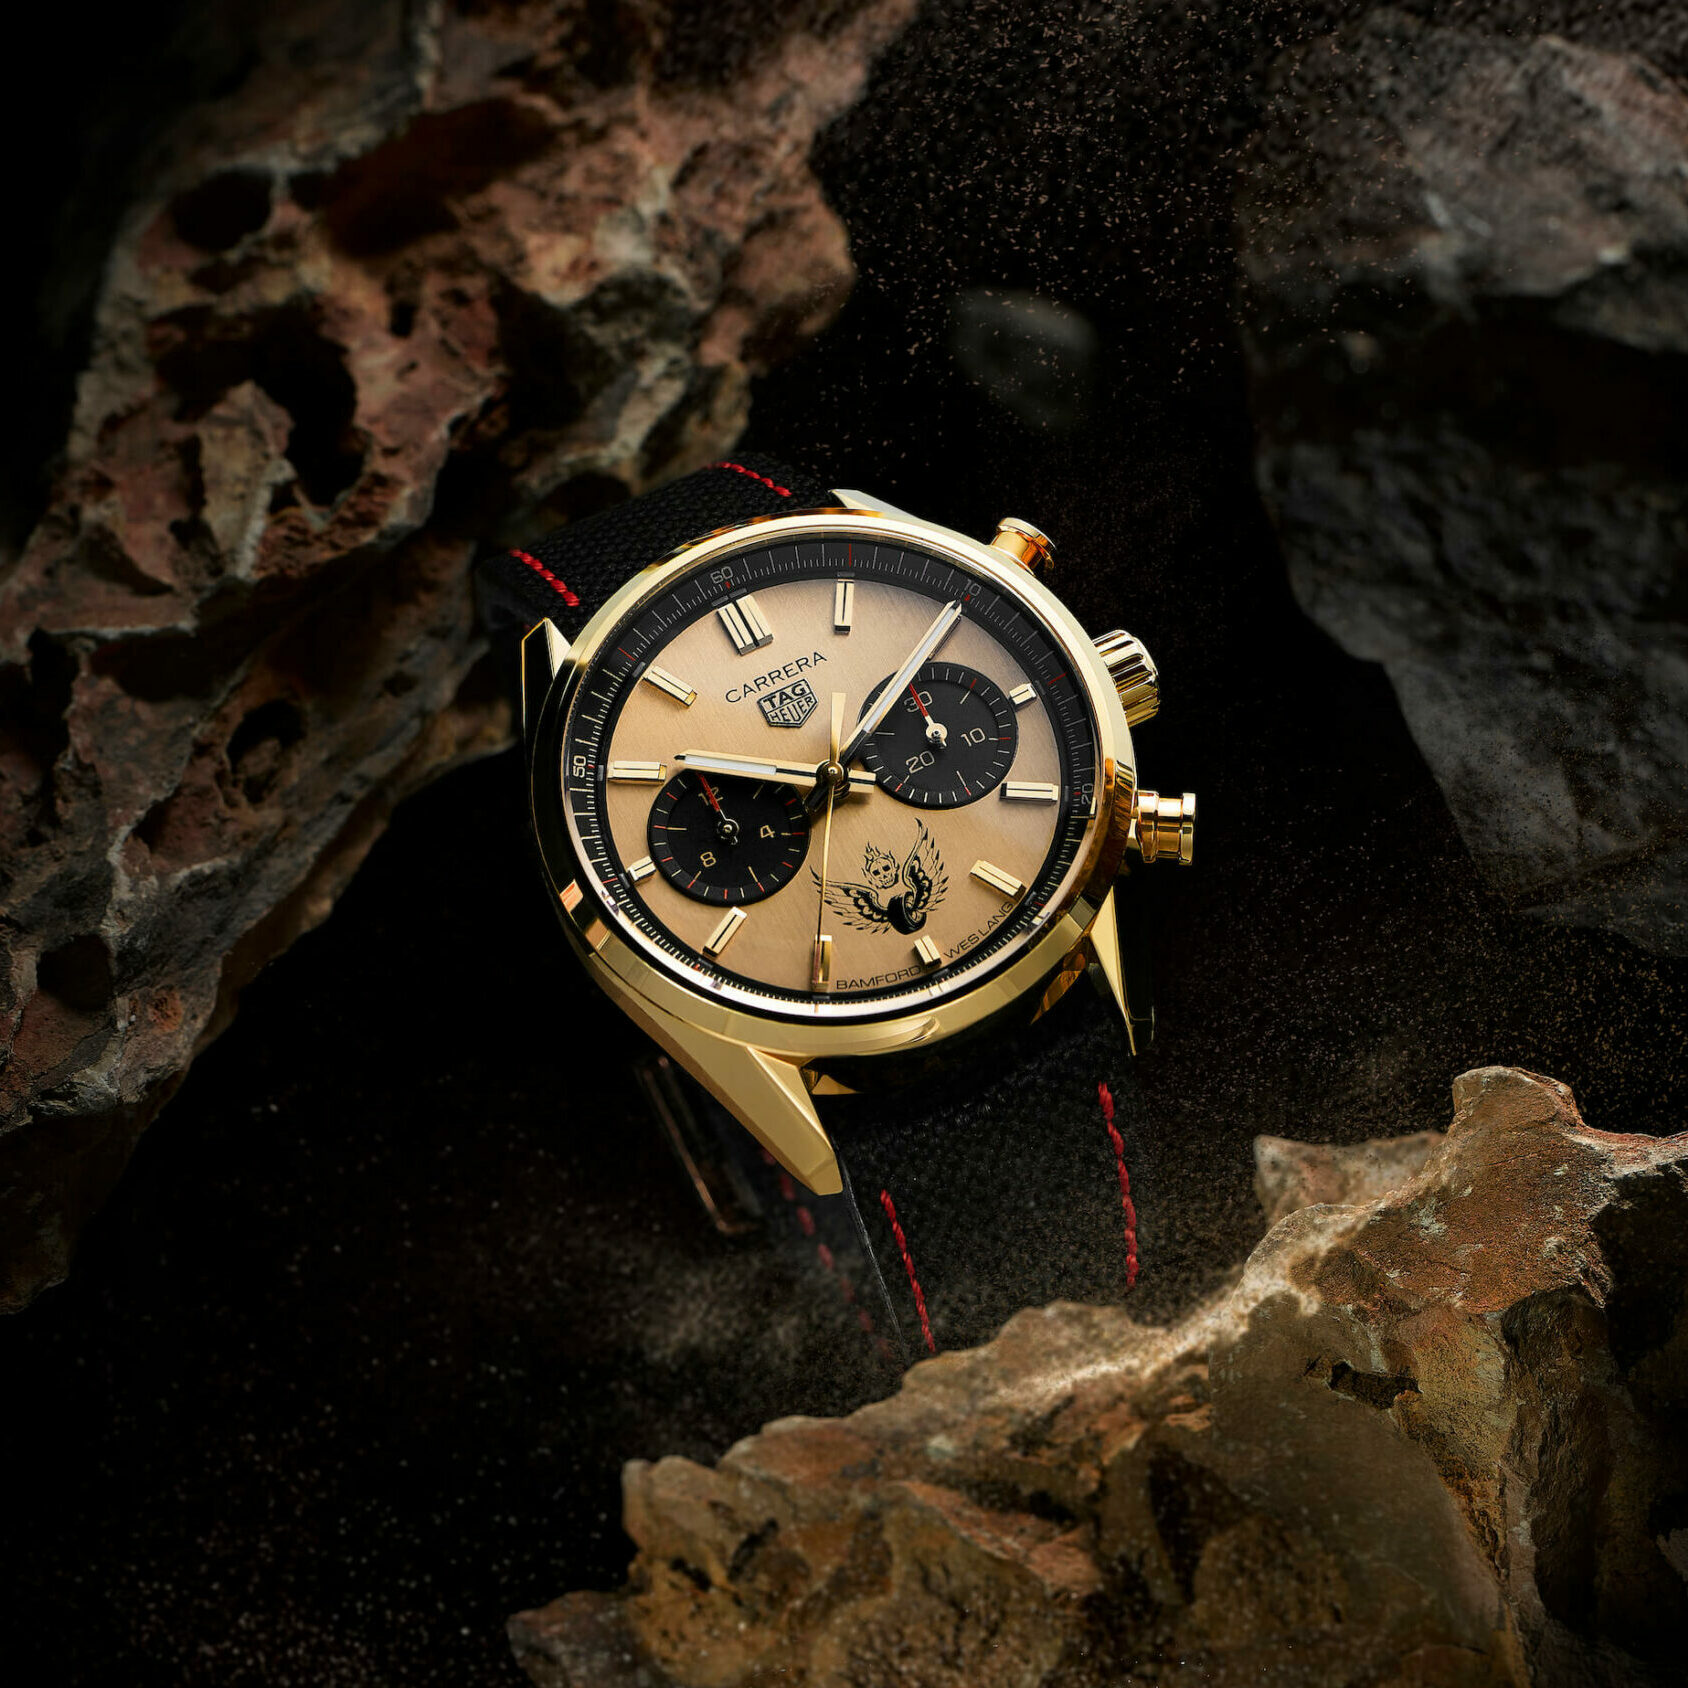 Bamford Watch Department x Wes Lang present a Limited Edition TAG Heuer Carrera Chronograph